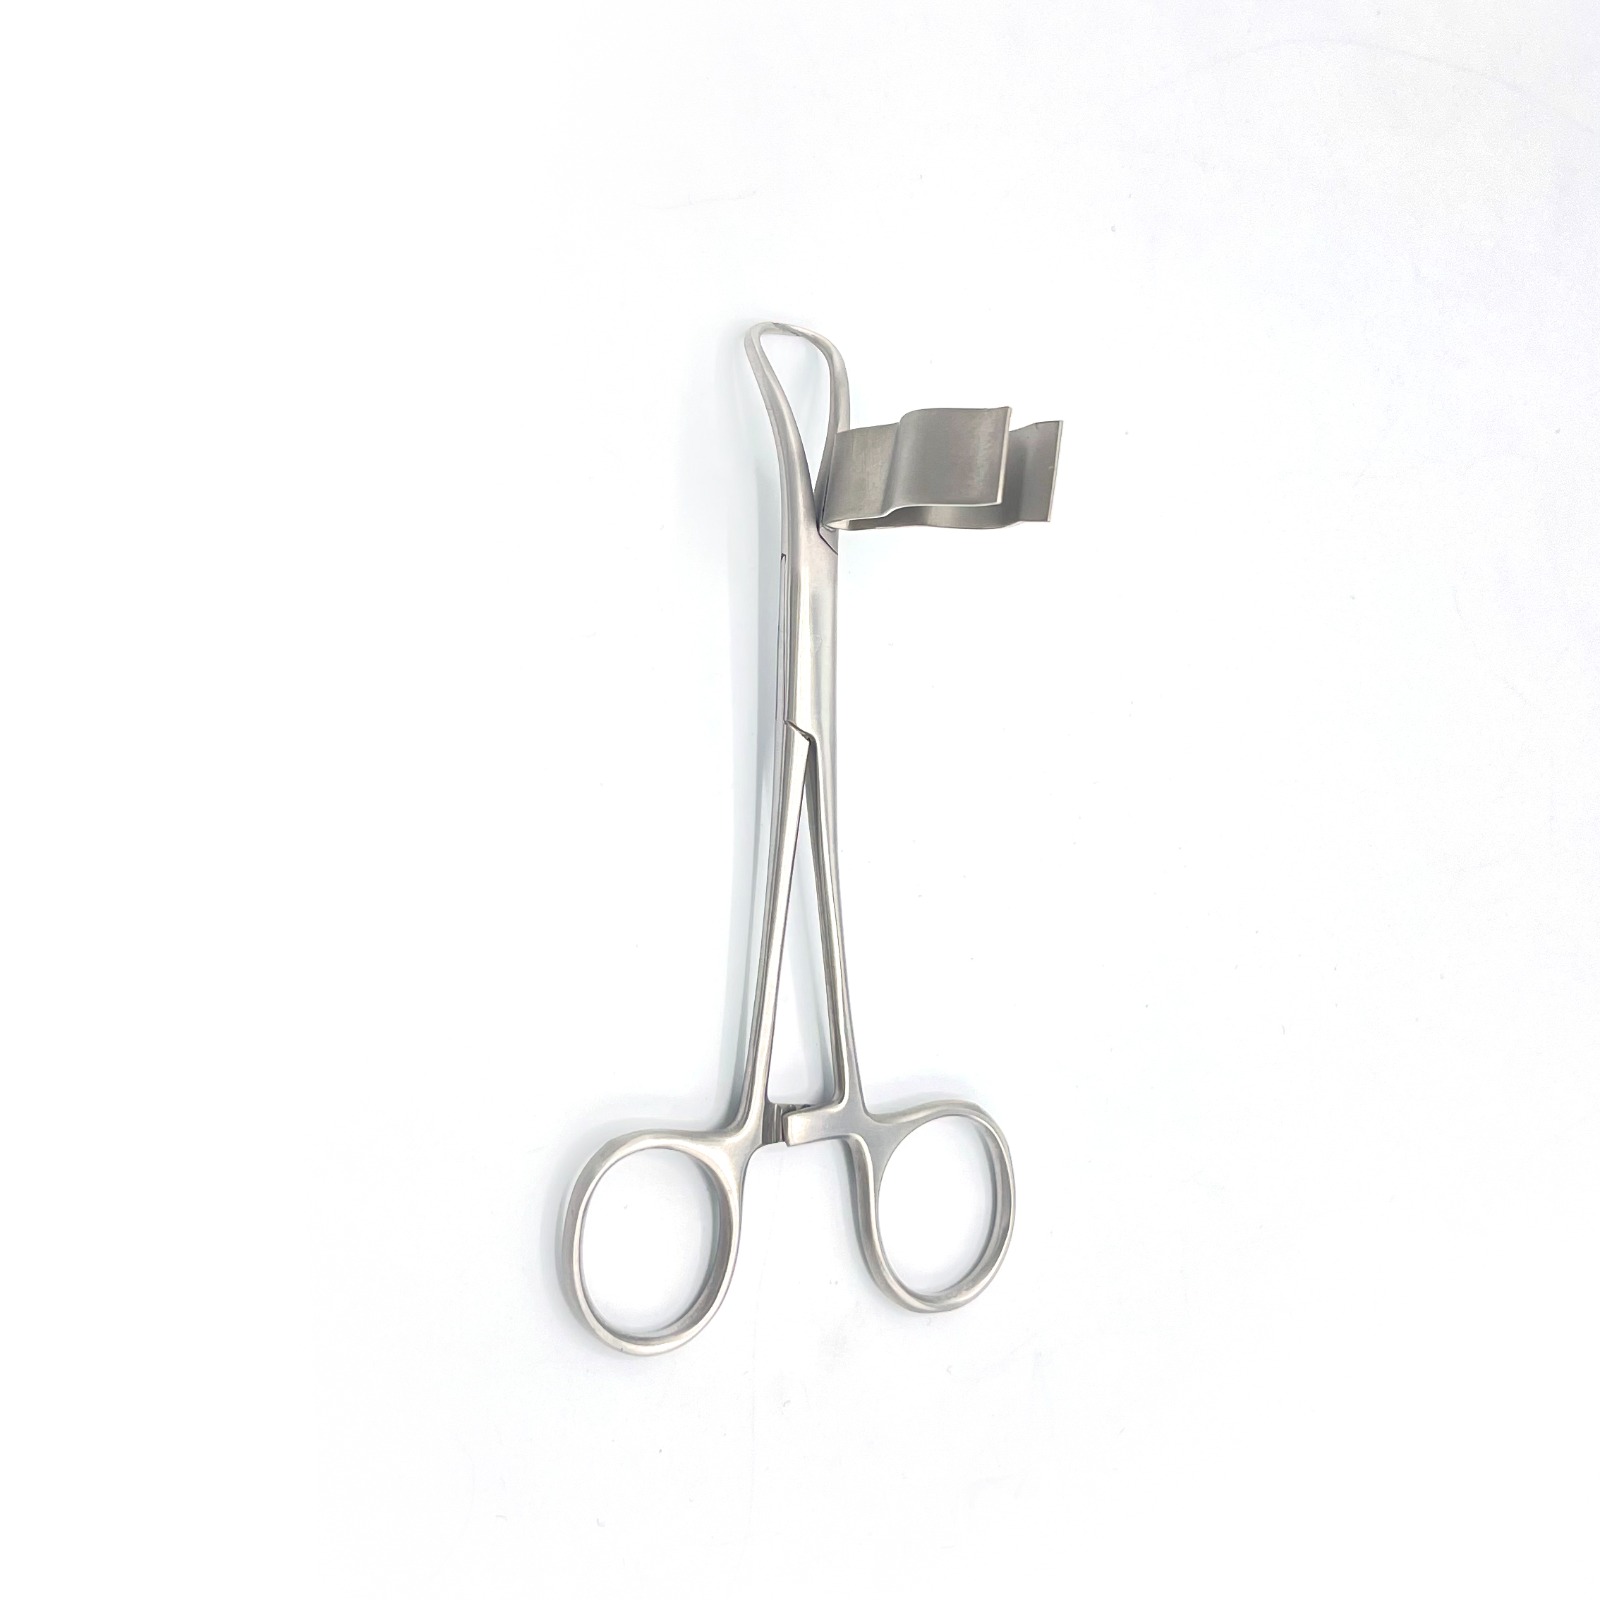 Read more about the article Hans International Surgical’s Backhaus Towel Clamp and Customized Surgical Instruments